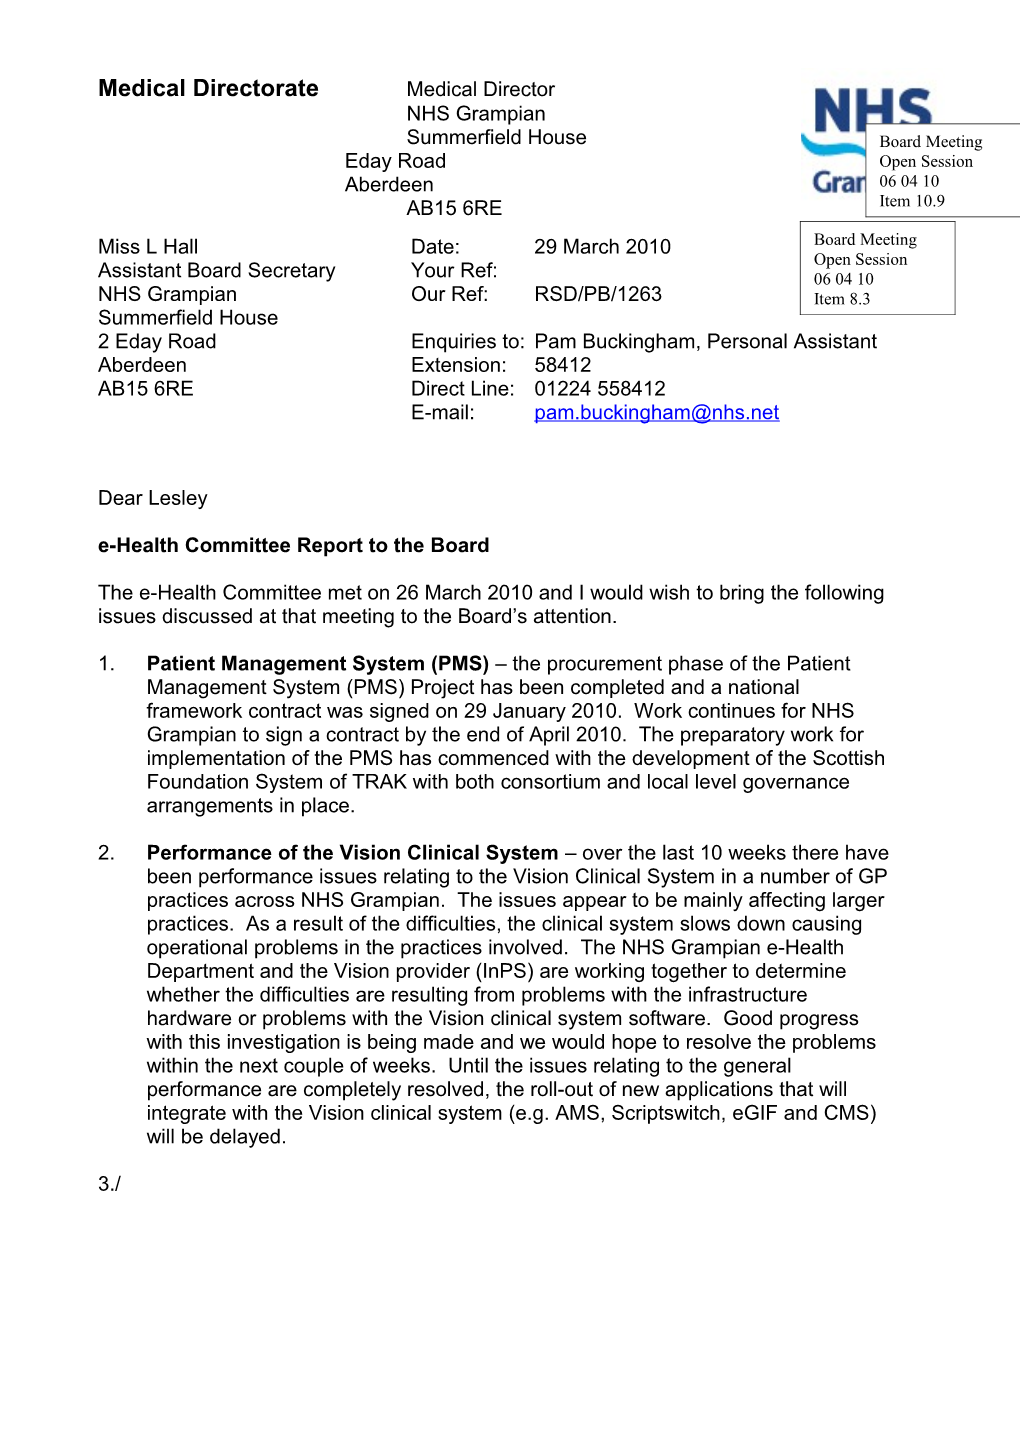 Item 8.3 for 6 Apr 10 Ehealth Cttee Ltr